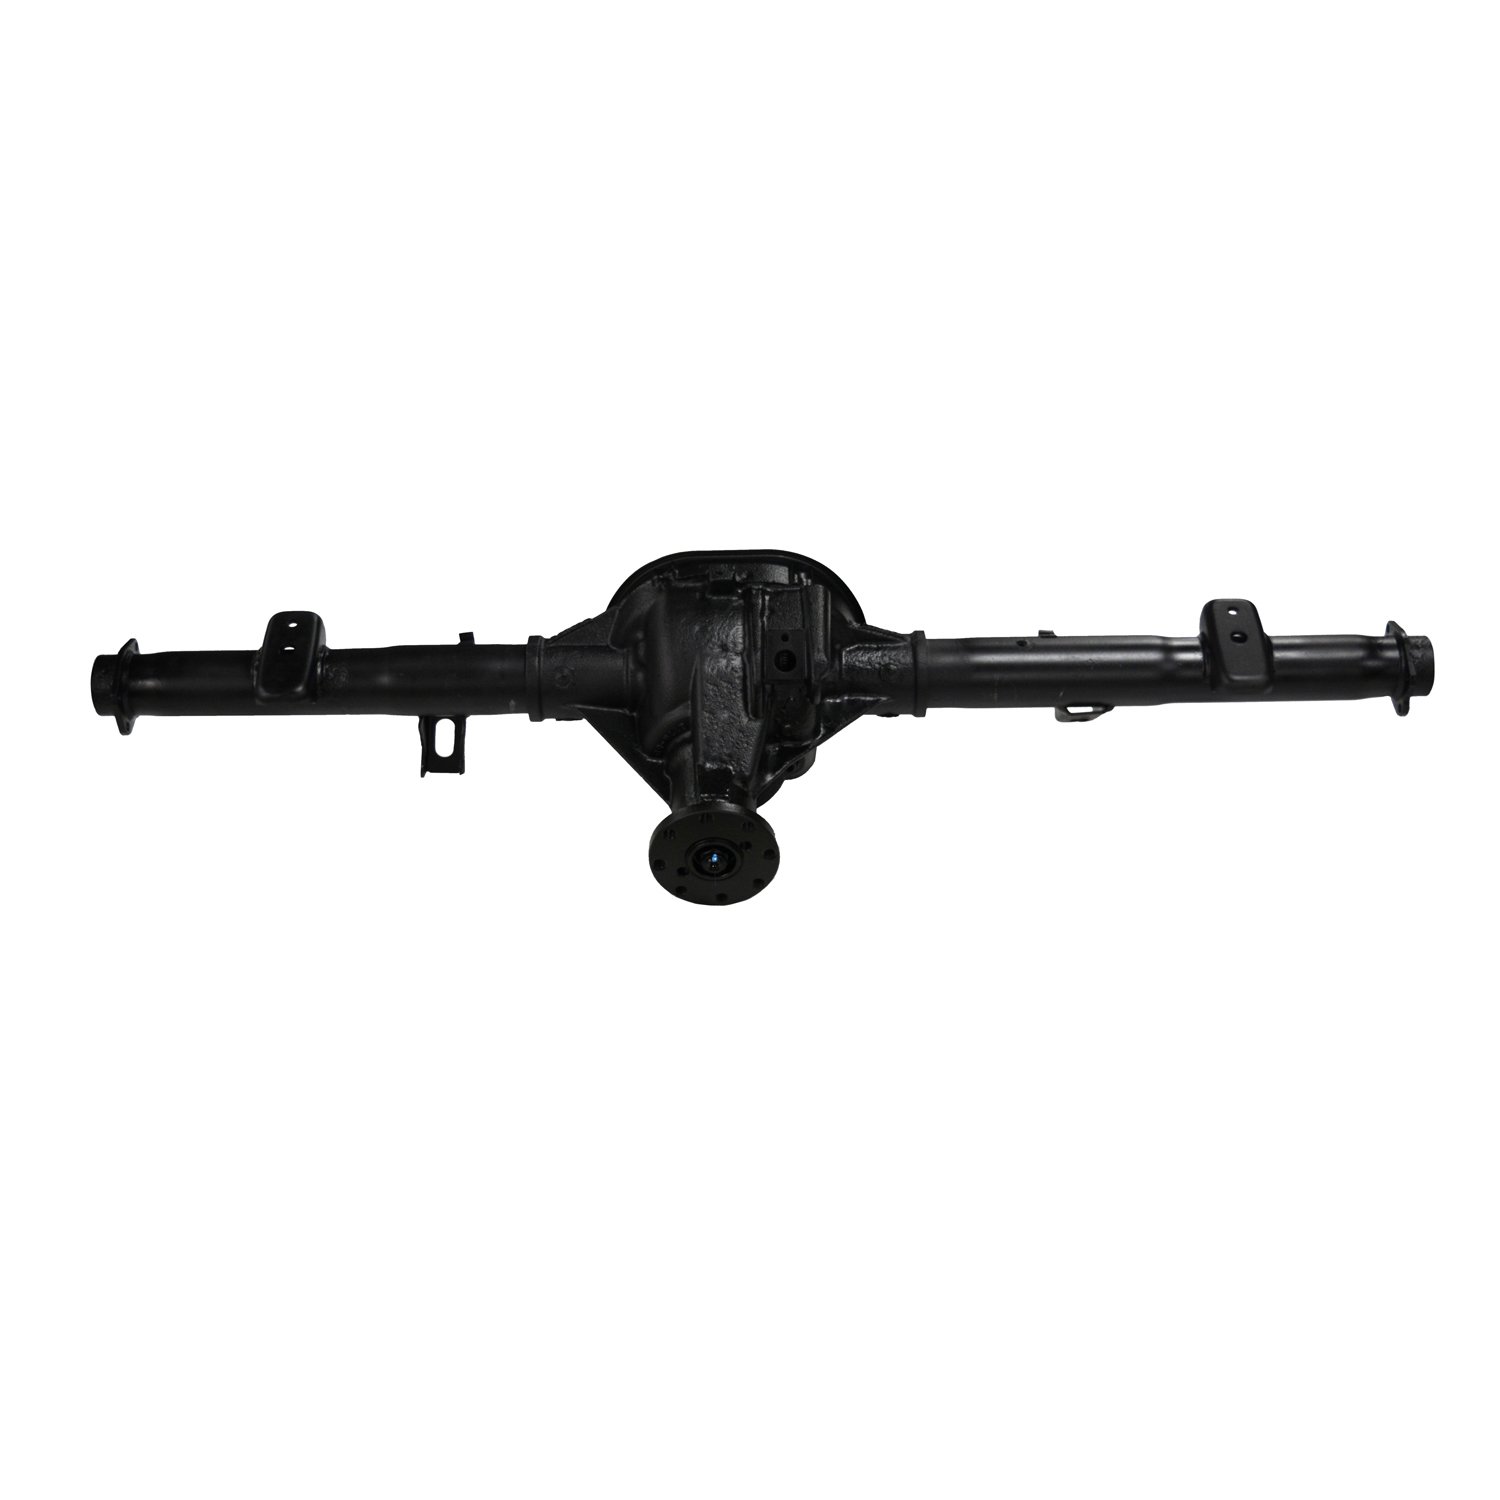 Remanufactured Complete Axle Assembly for 7.5" 1998 Ranger 3.45, 9" Drum Brakes, Posi LSD